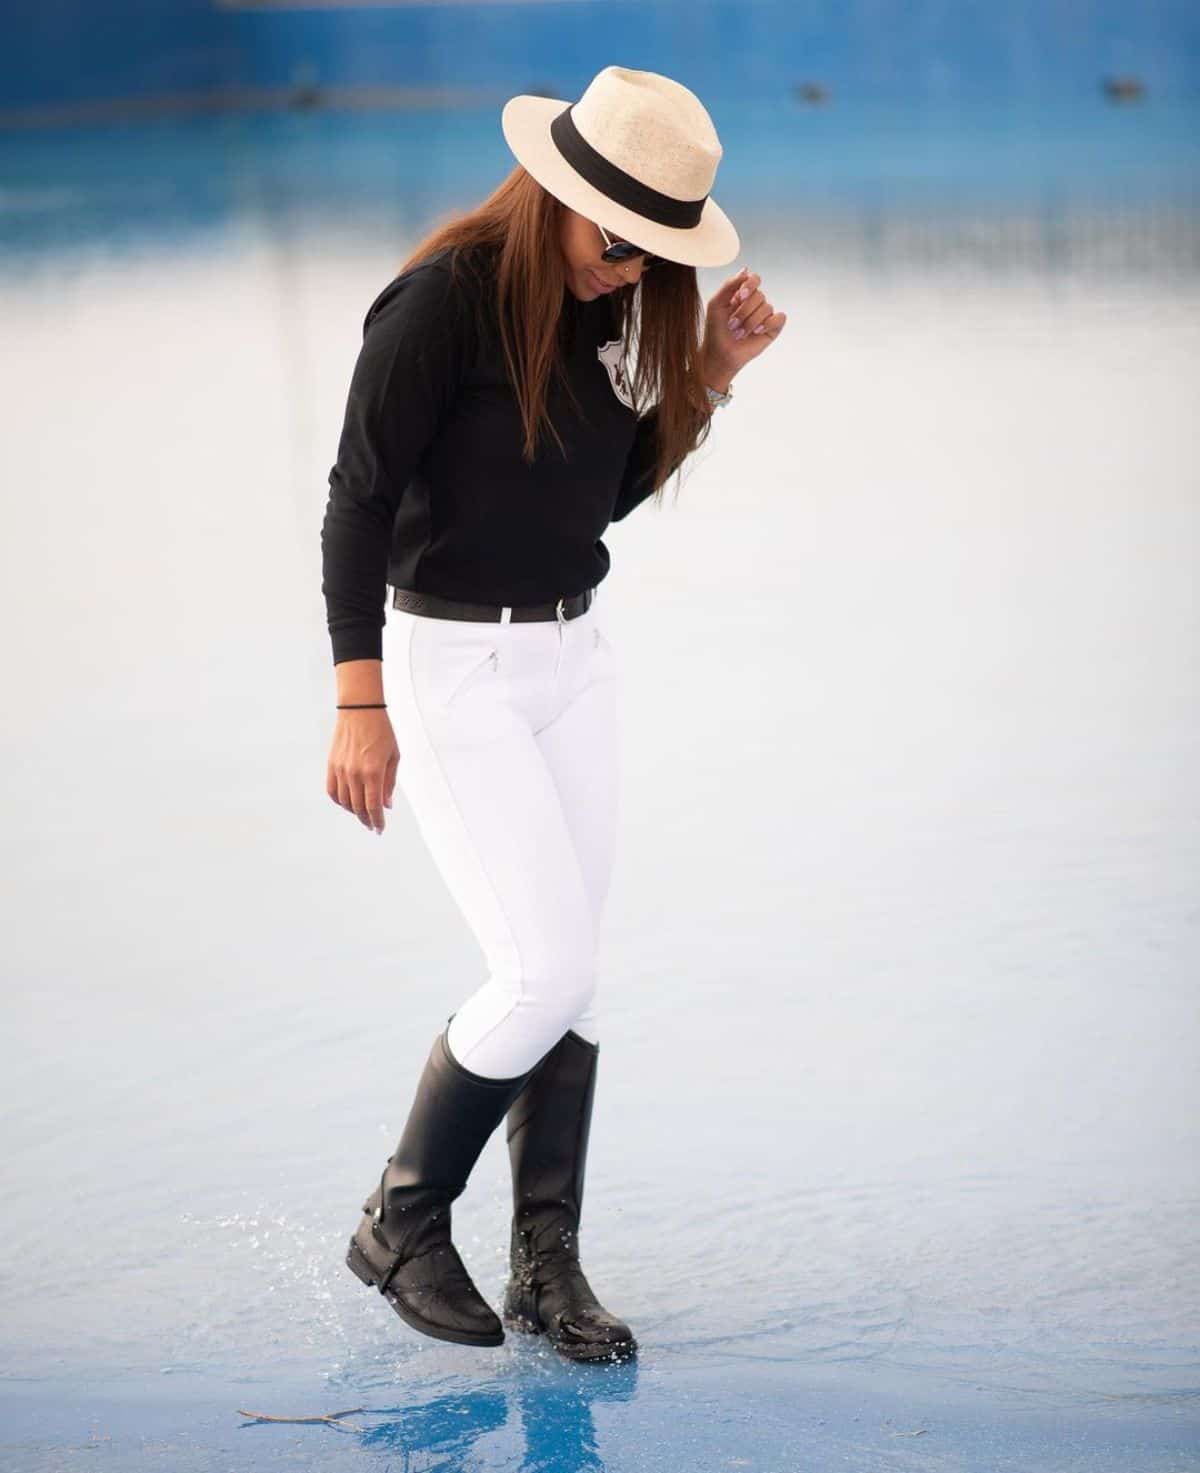 A young woman in an equestrian outfit and a hat stand in shallow water.